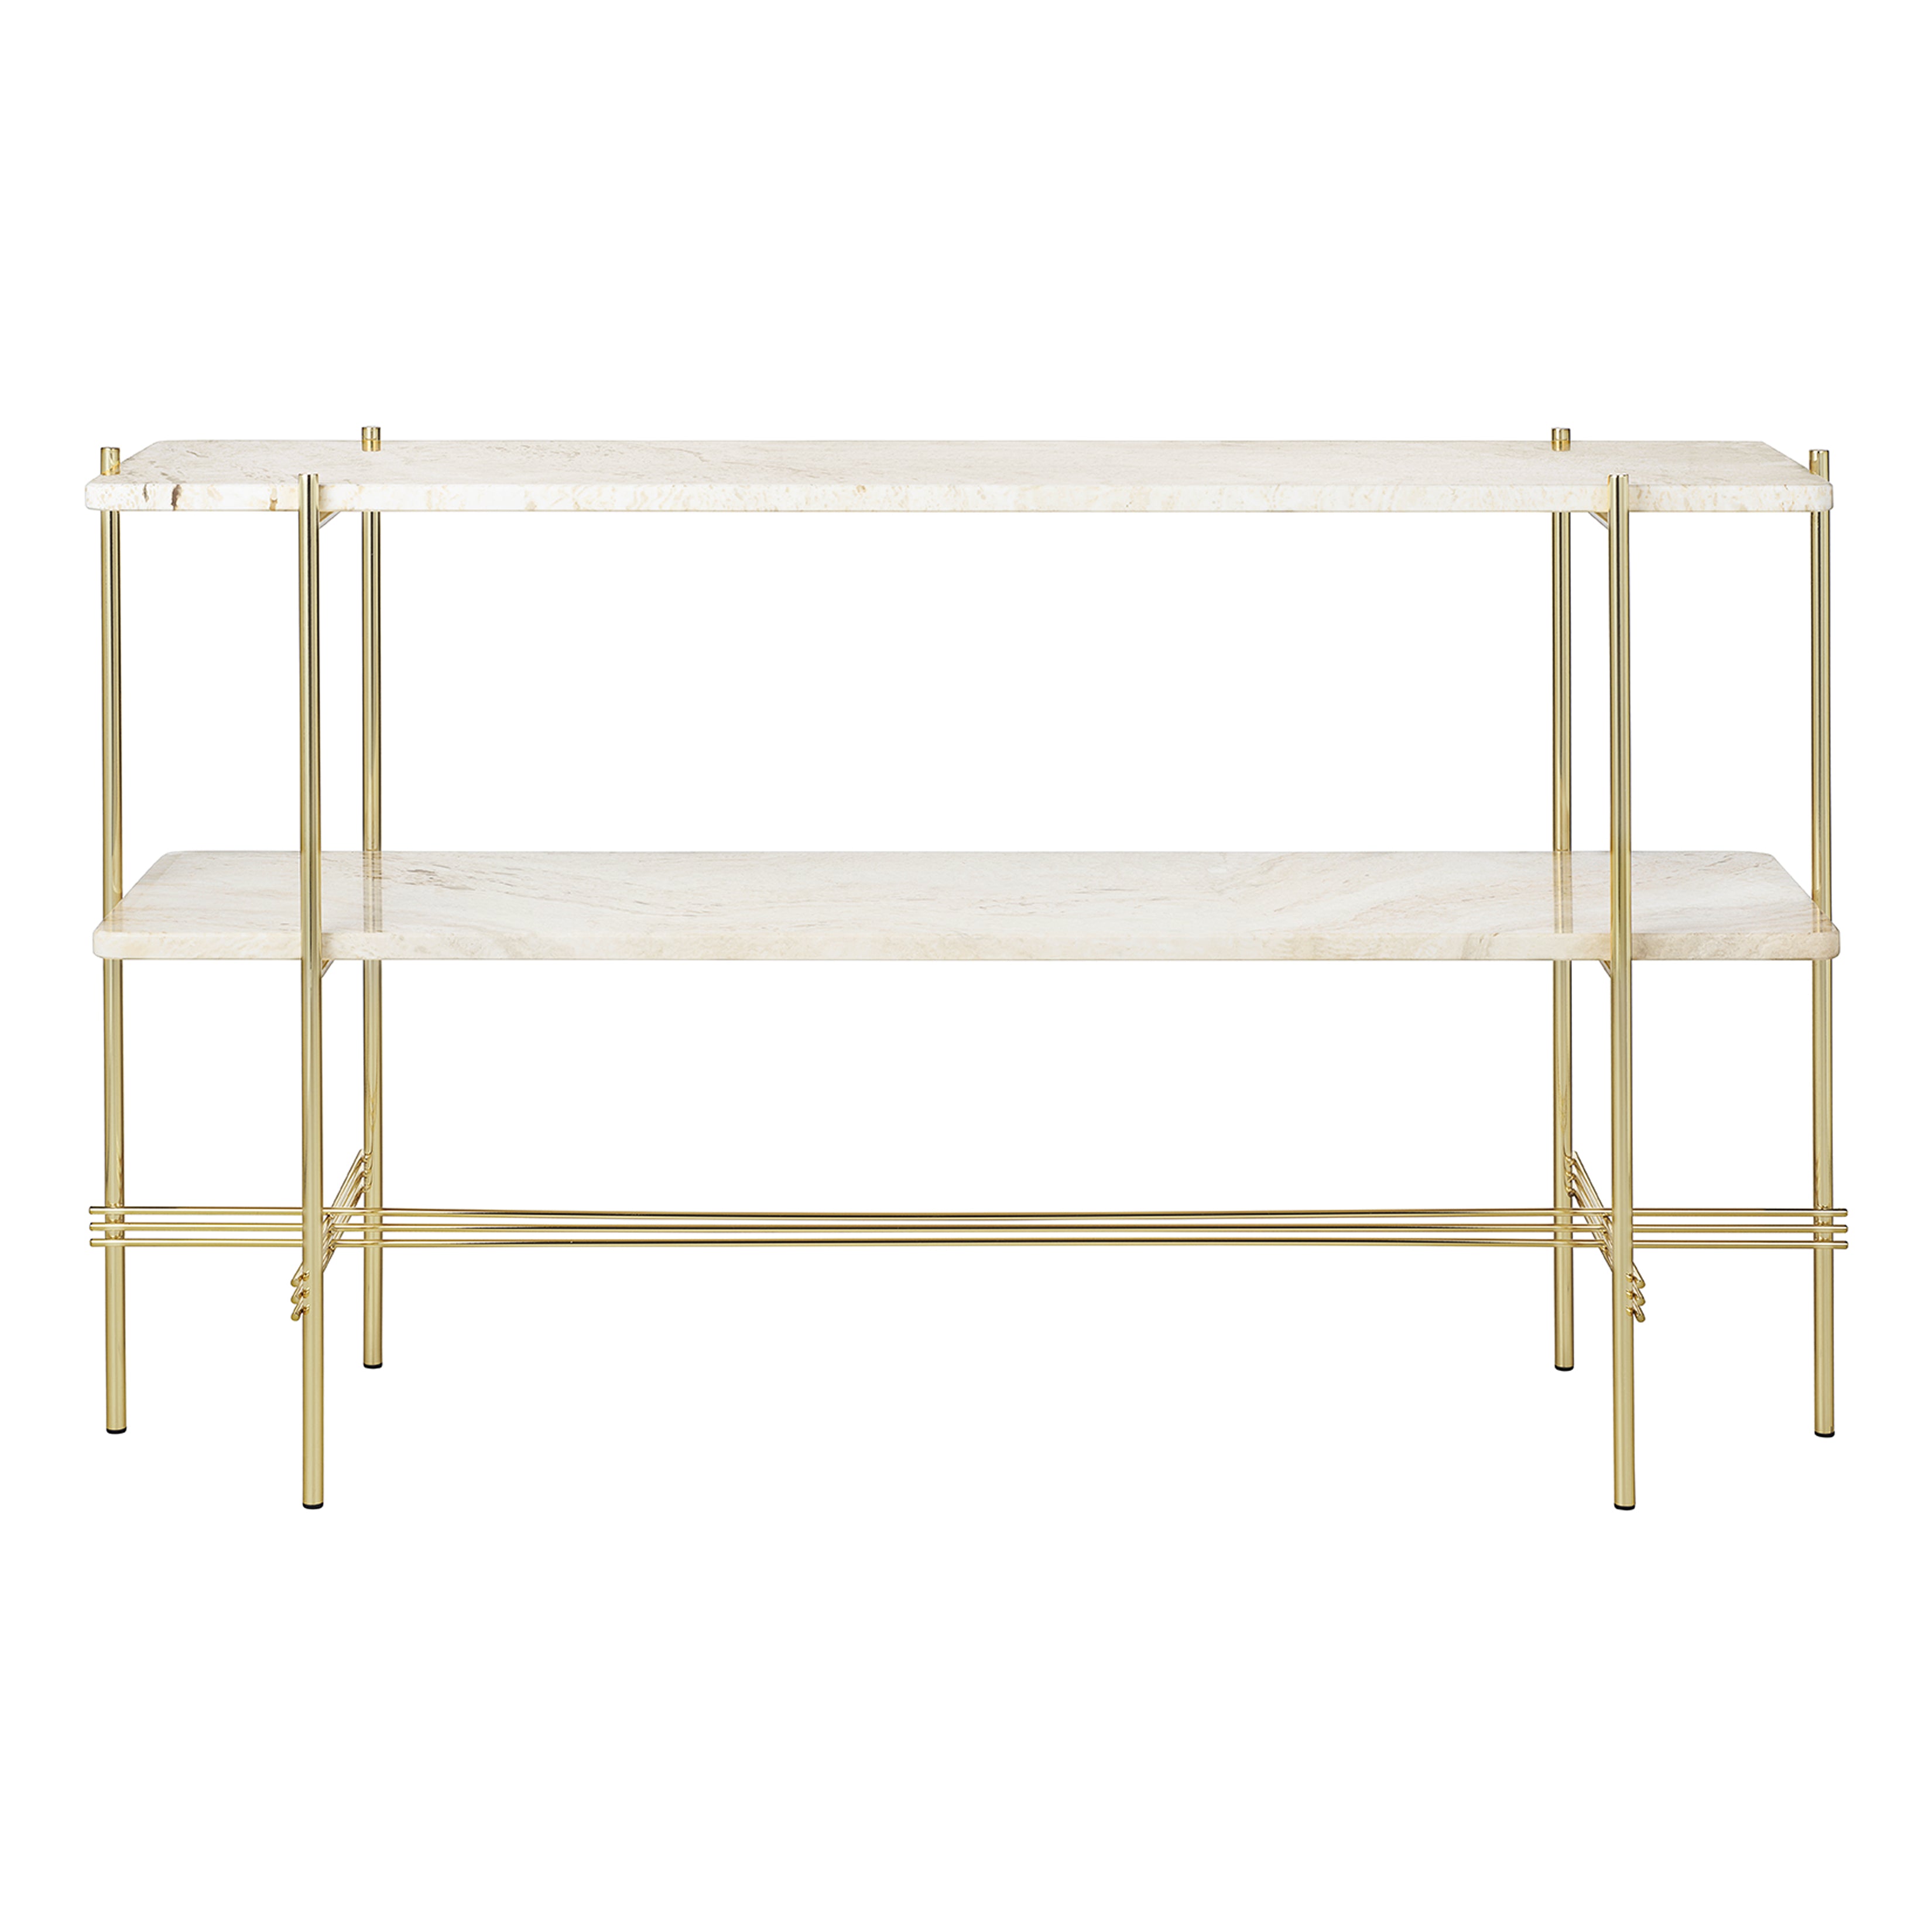 TS Console: Without Tray + Brass + Neutral White Travertine